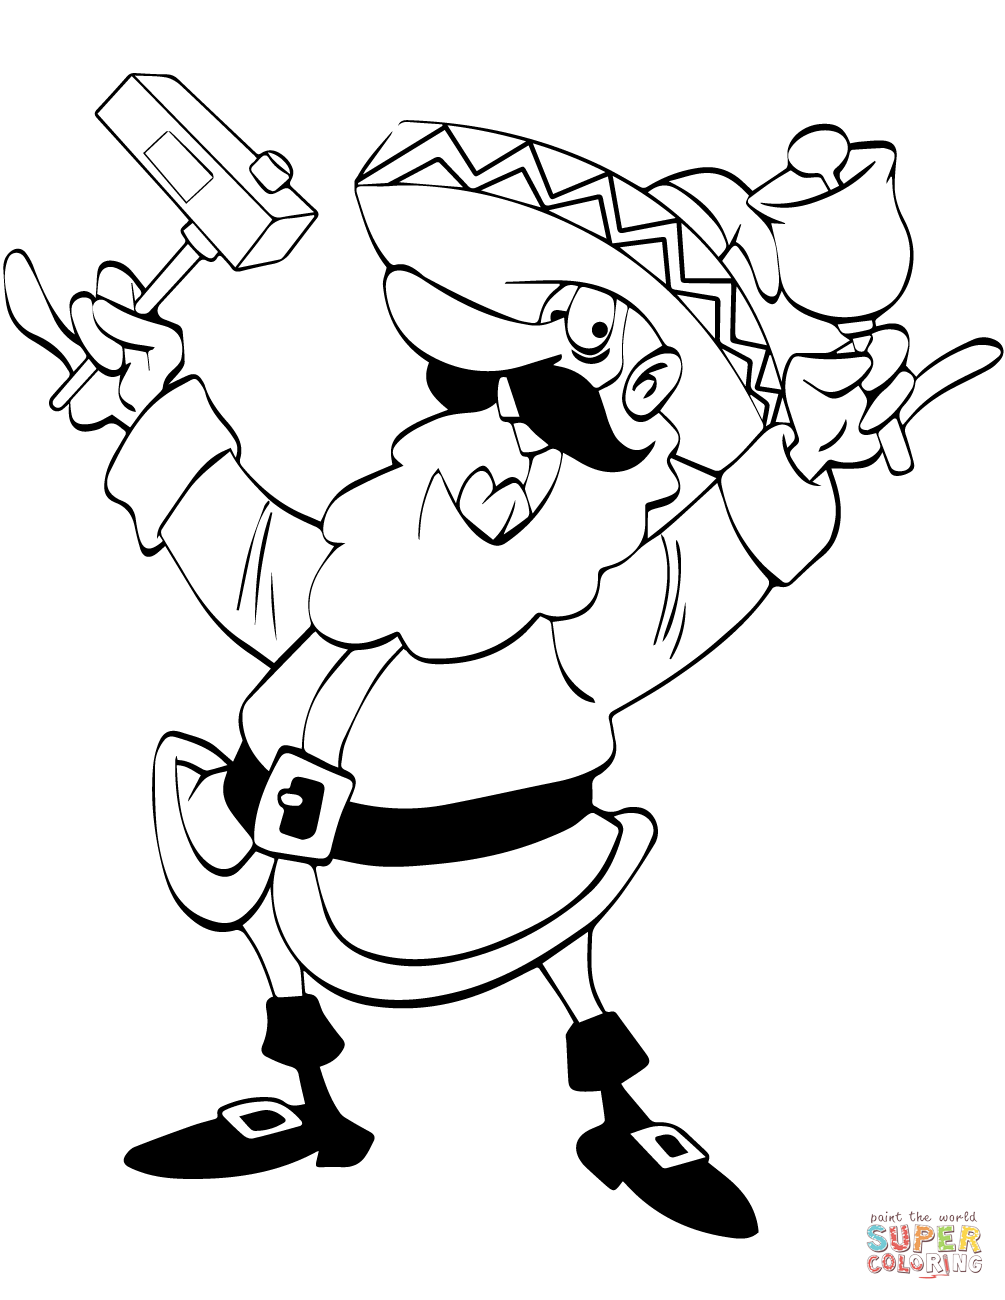 Mexican santa claus coloring page free printable coloring pages